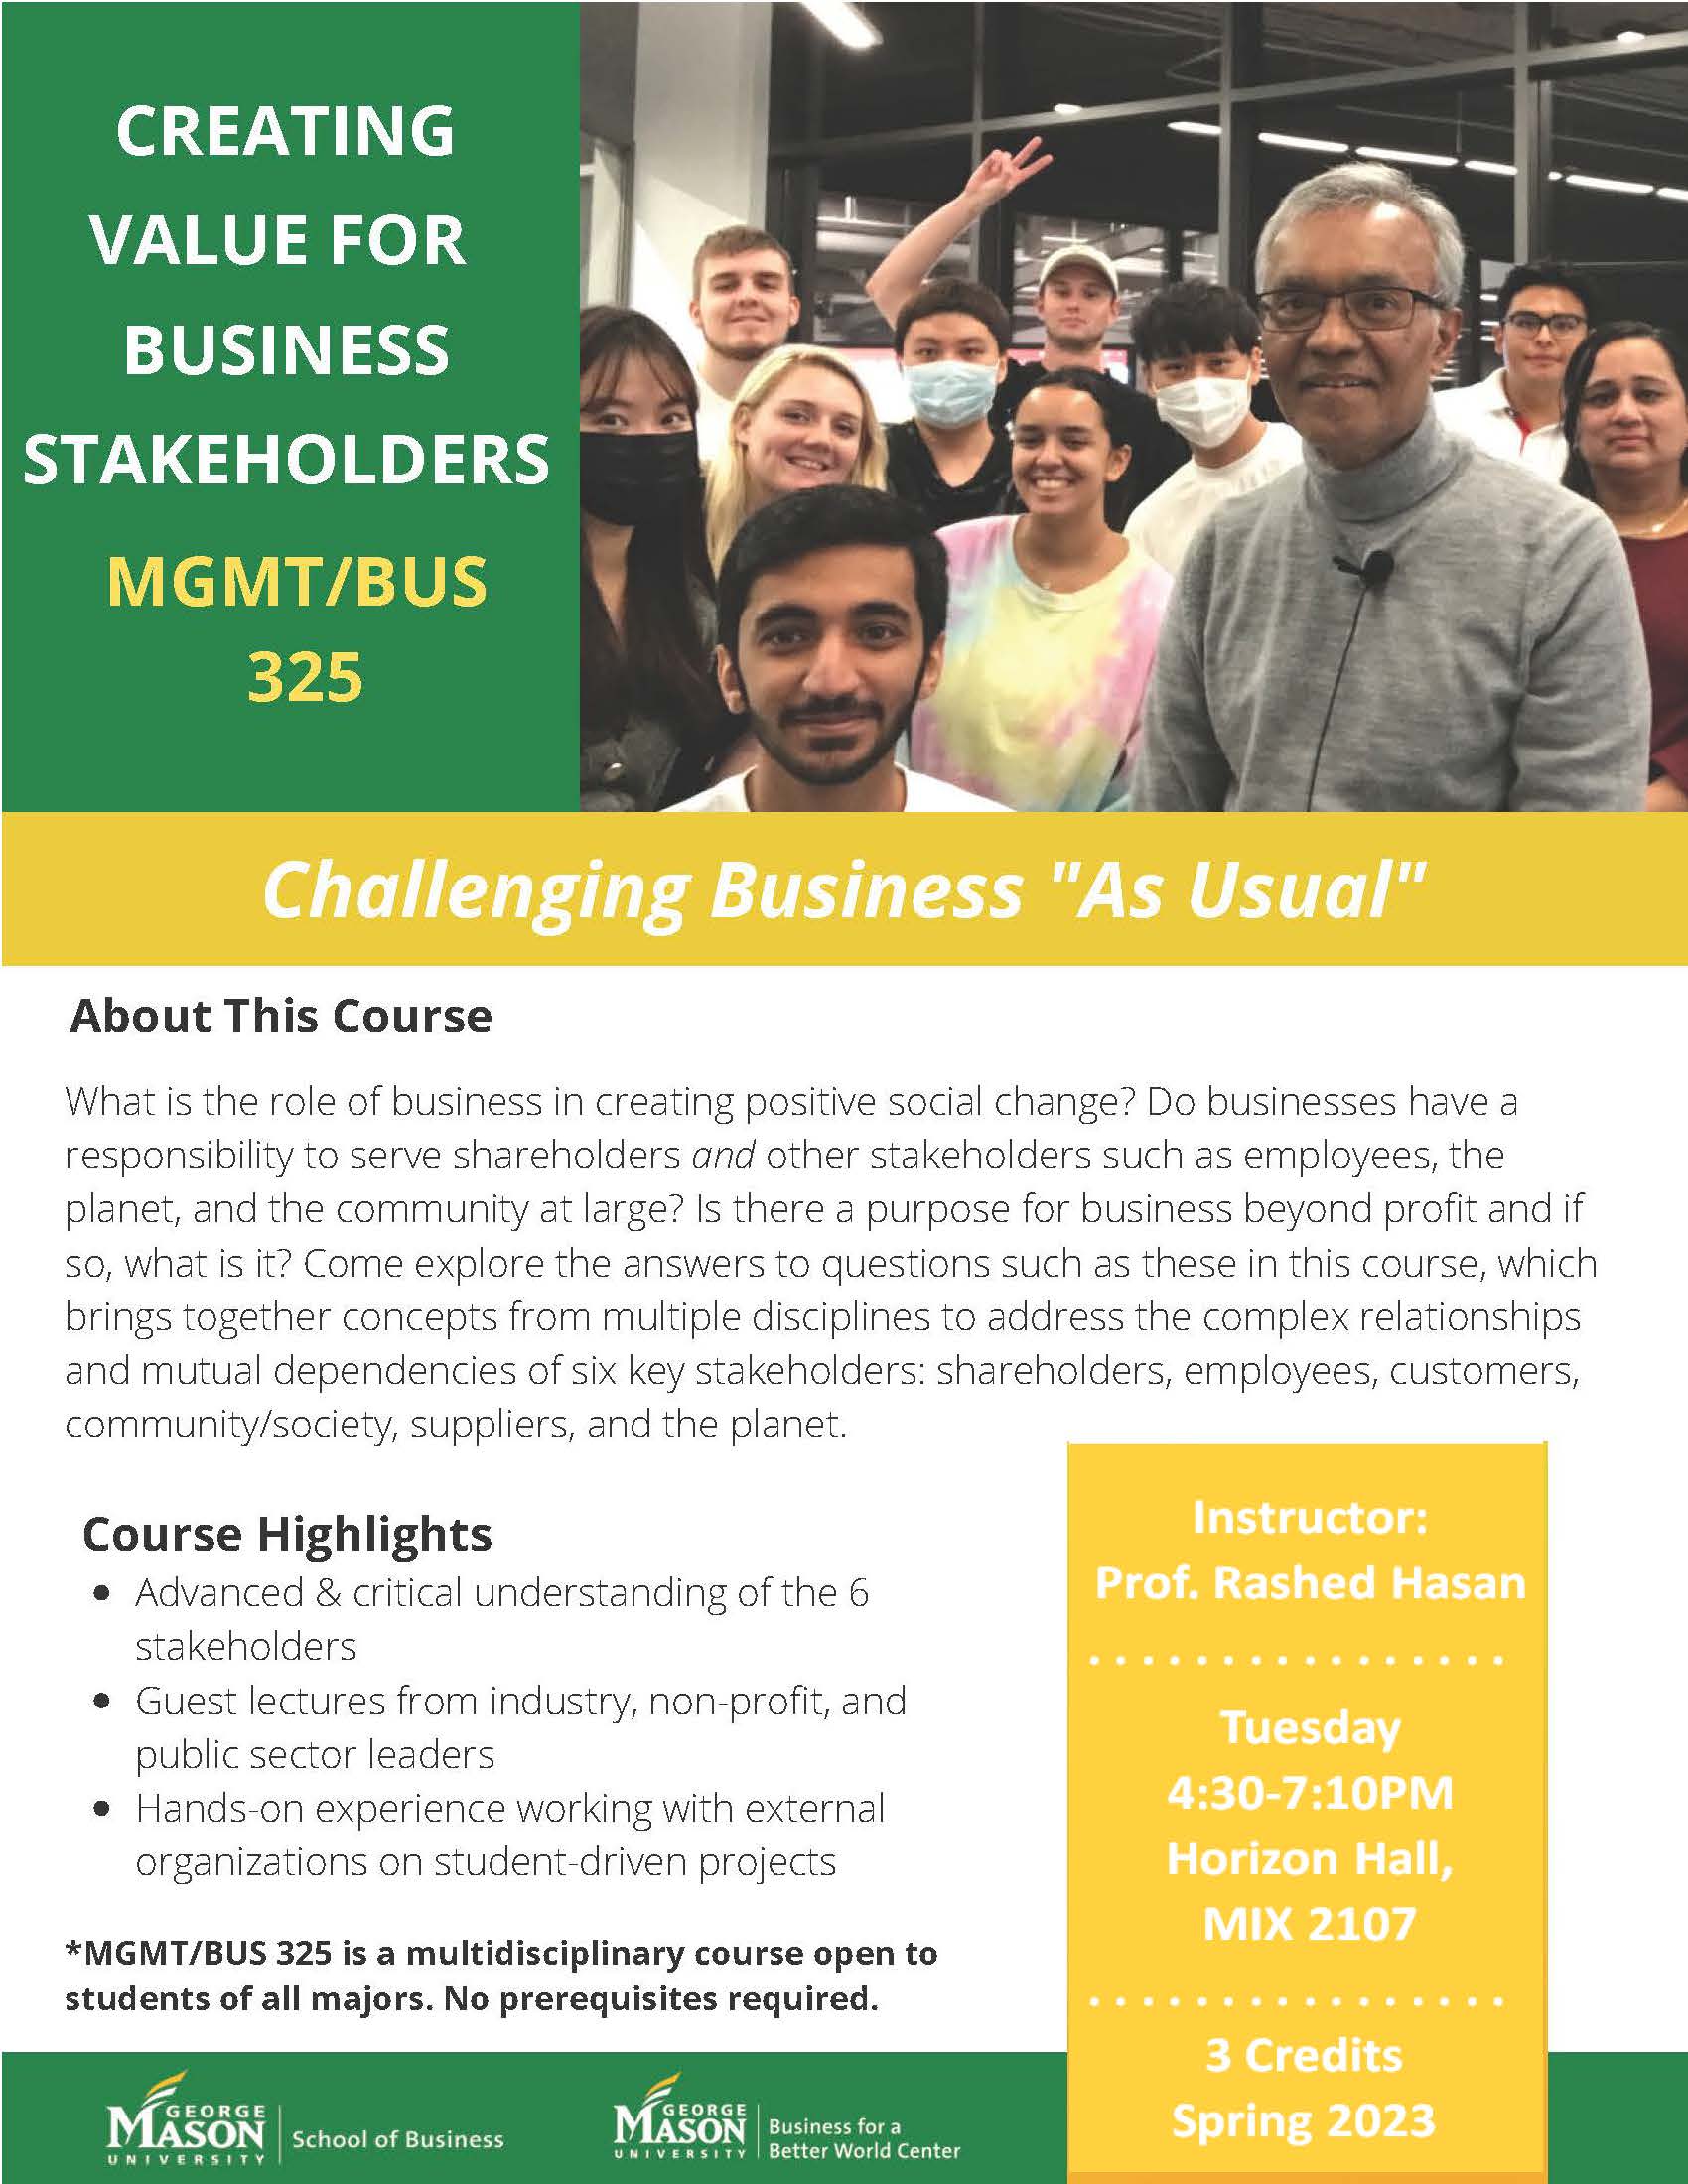 BUS/MGMT 326 Value Creation for Business Stakeholders course for spring 2023. Course description included in post